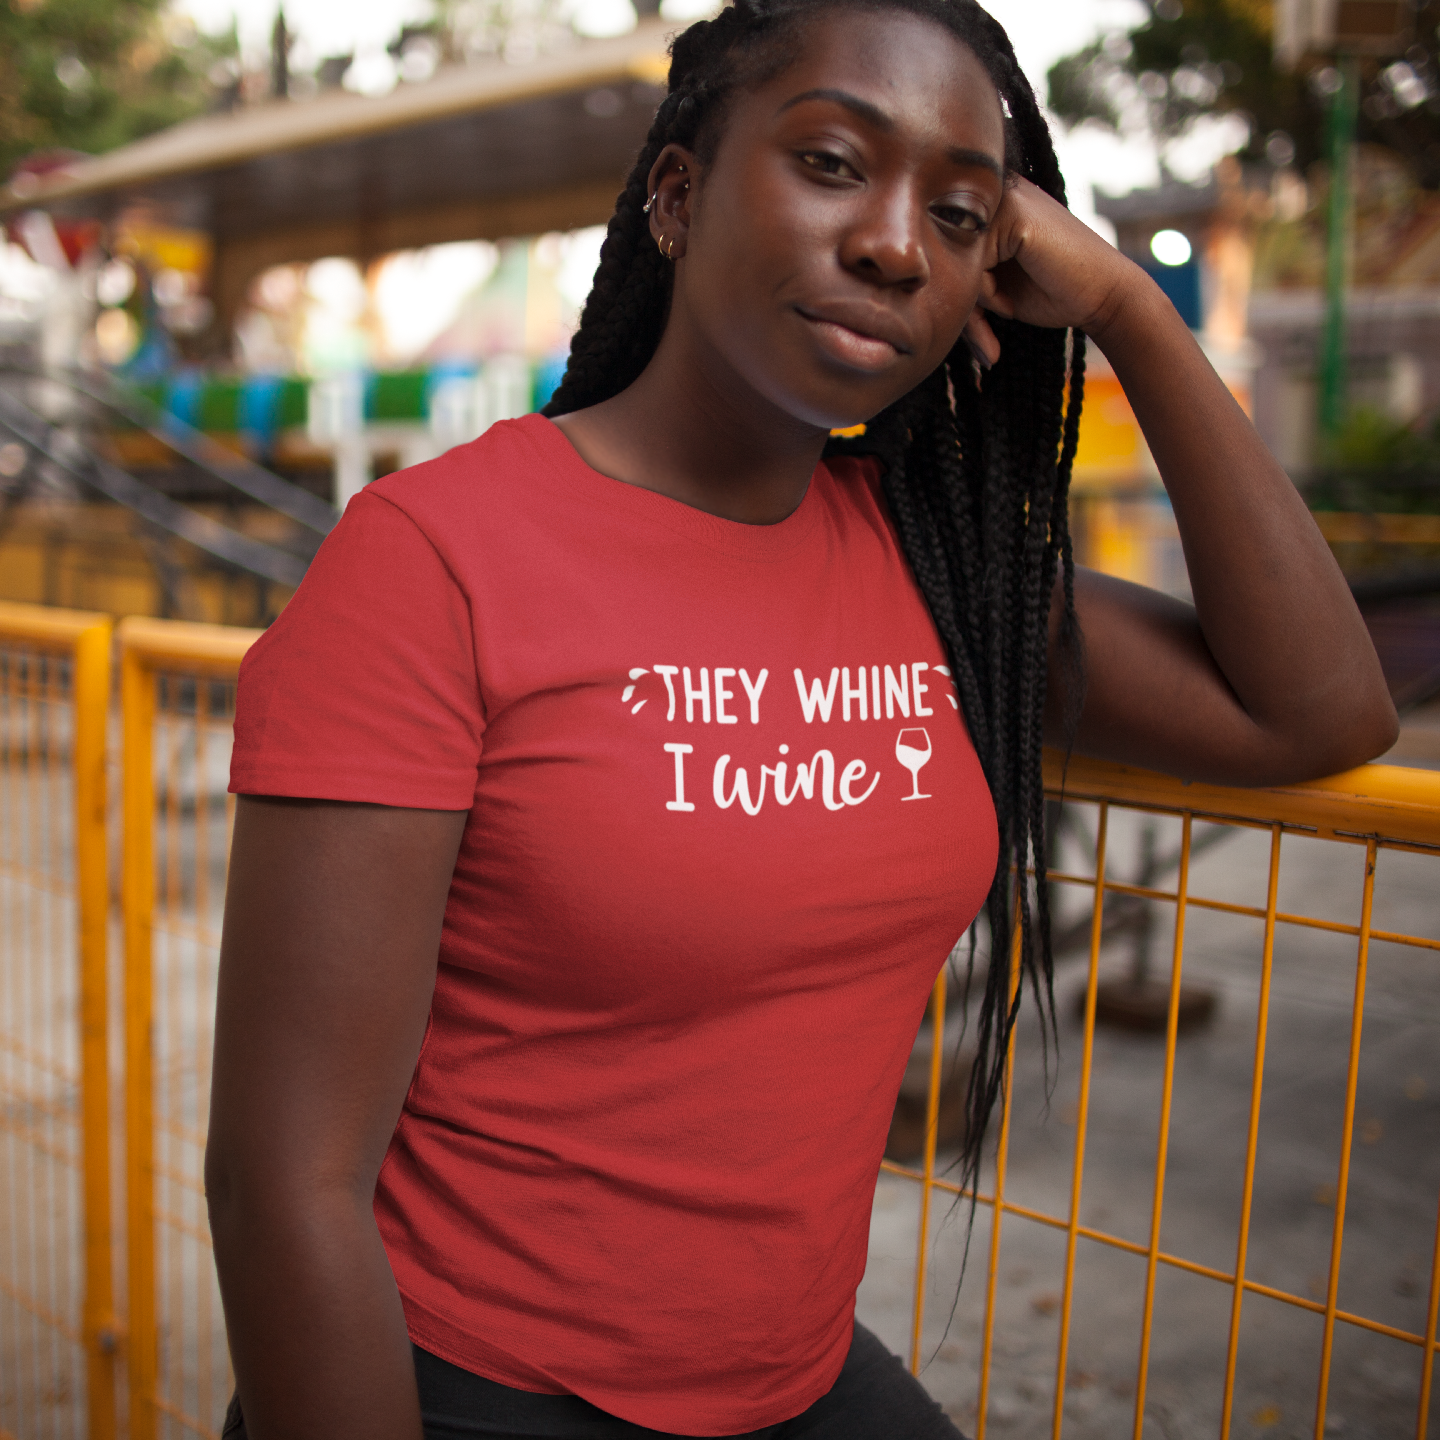 'They whine - I wine' adult shirt